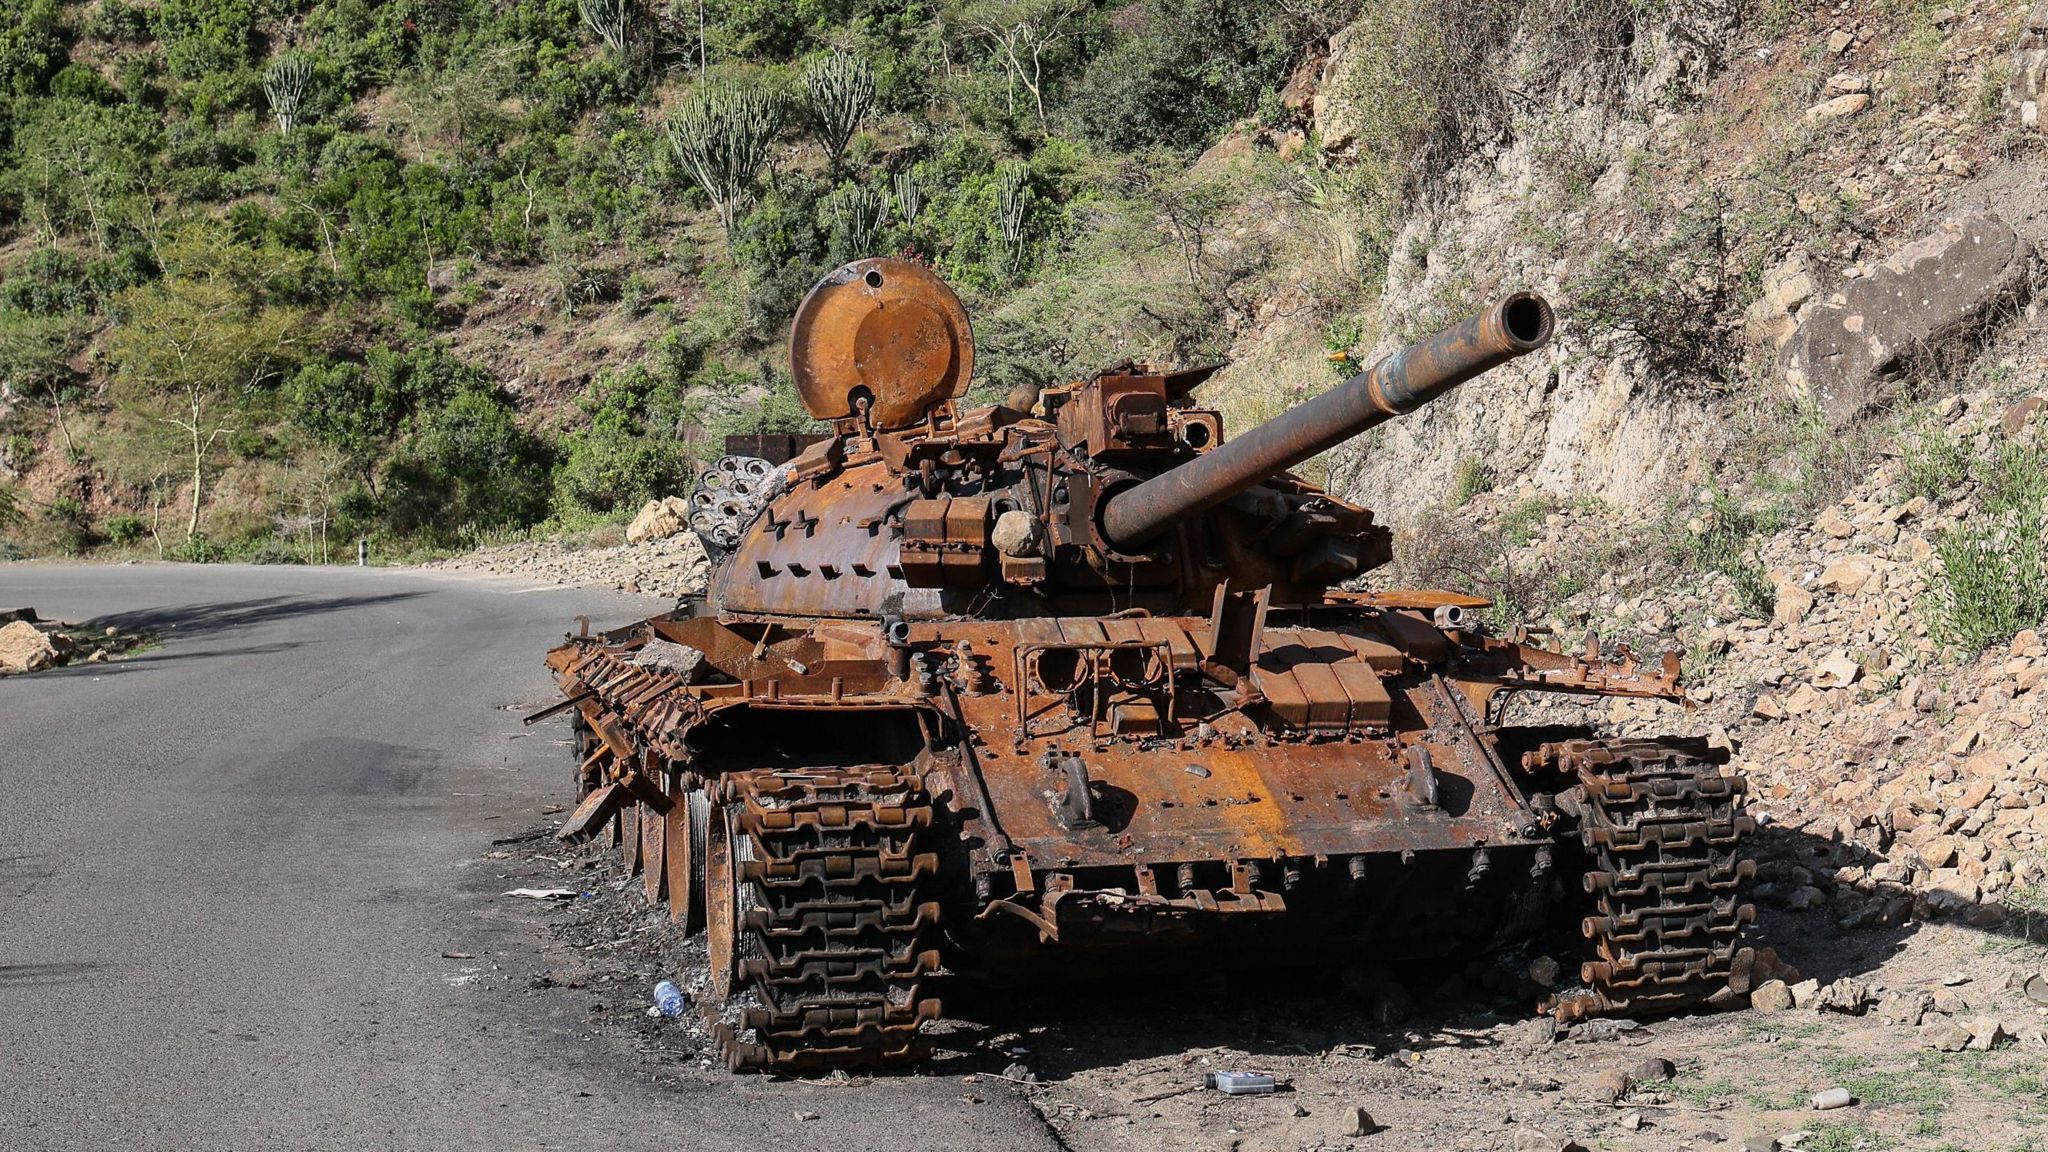 The wreckage of a tank in Ethiopia